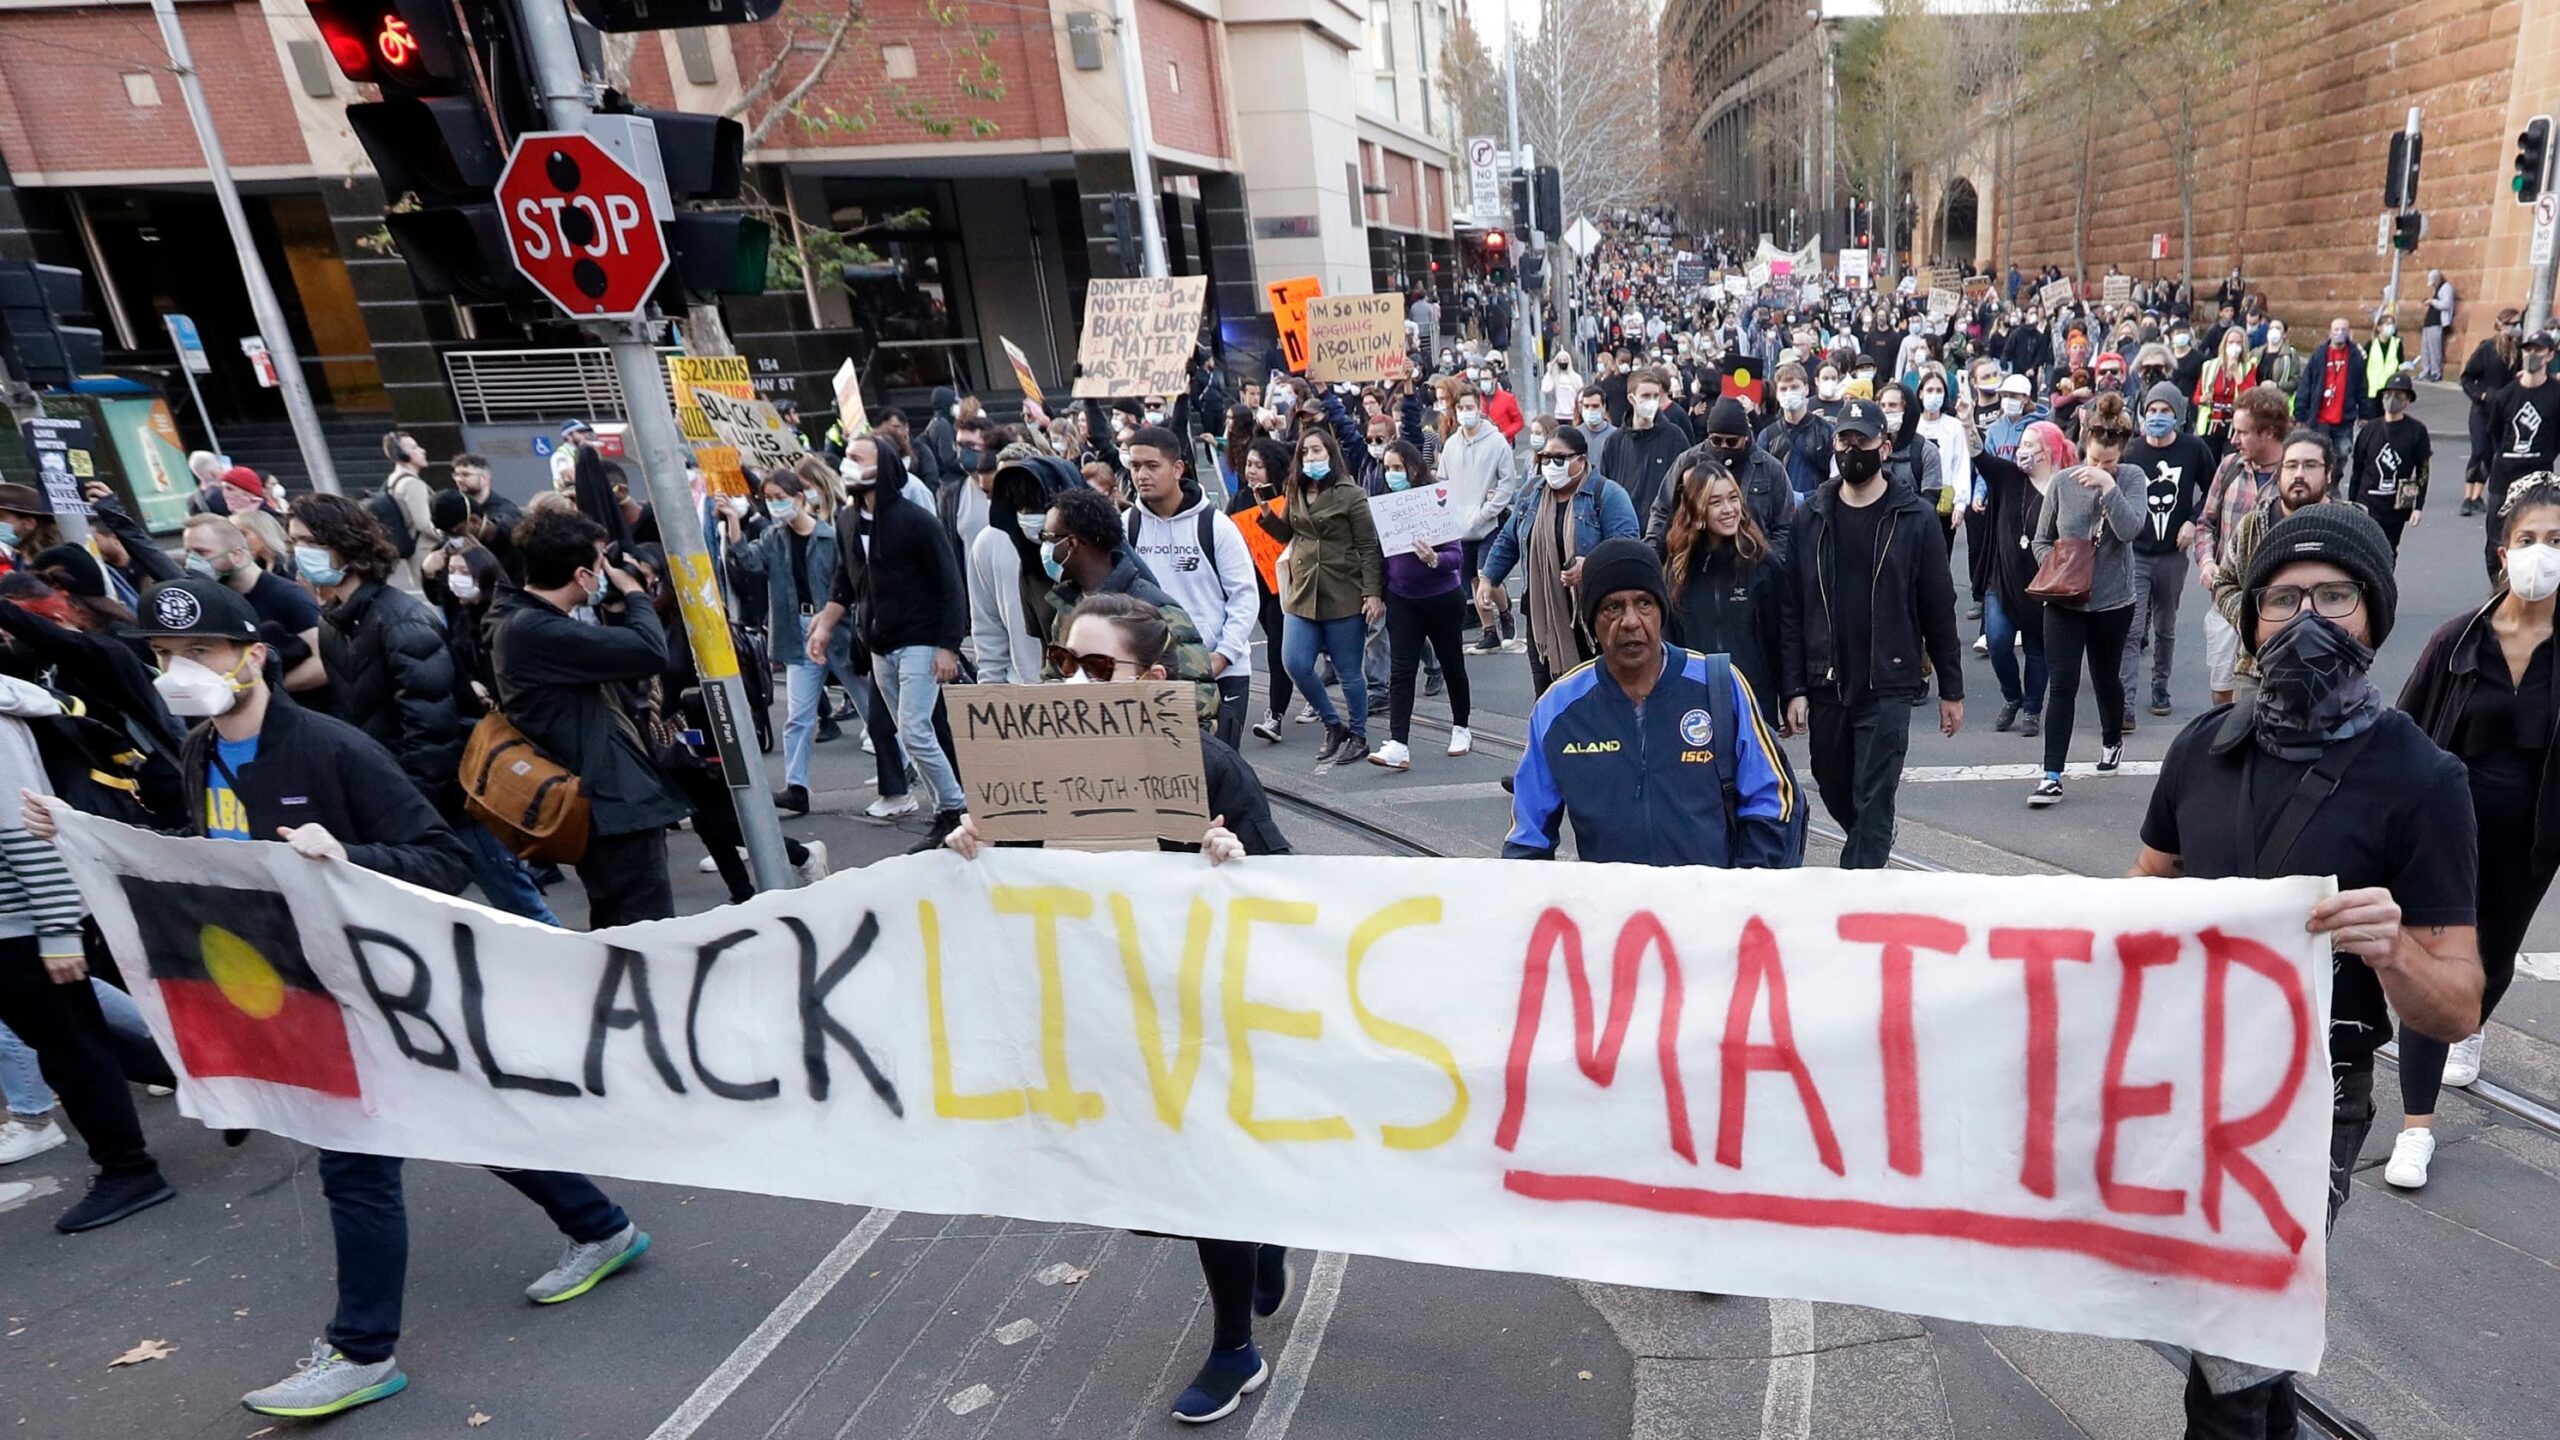 Read more about the article Black Lives Matter want Speaker Mattiello out